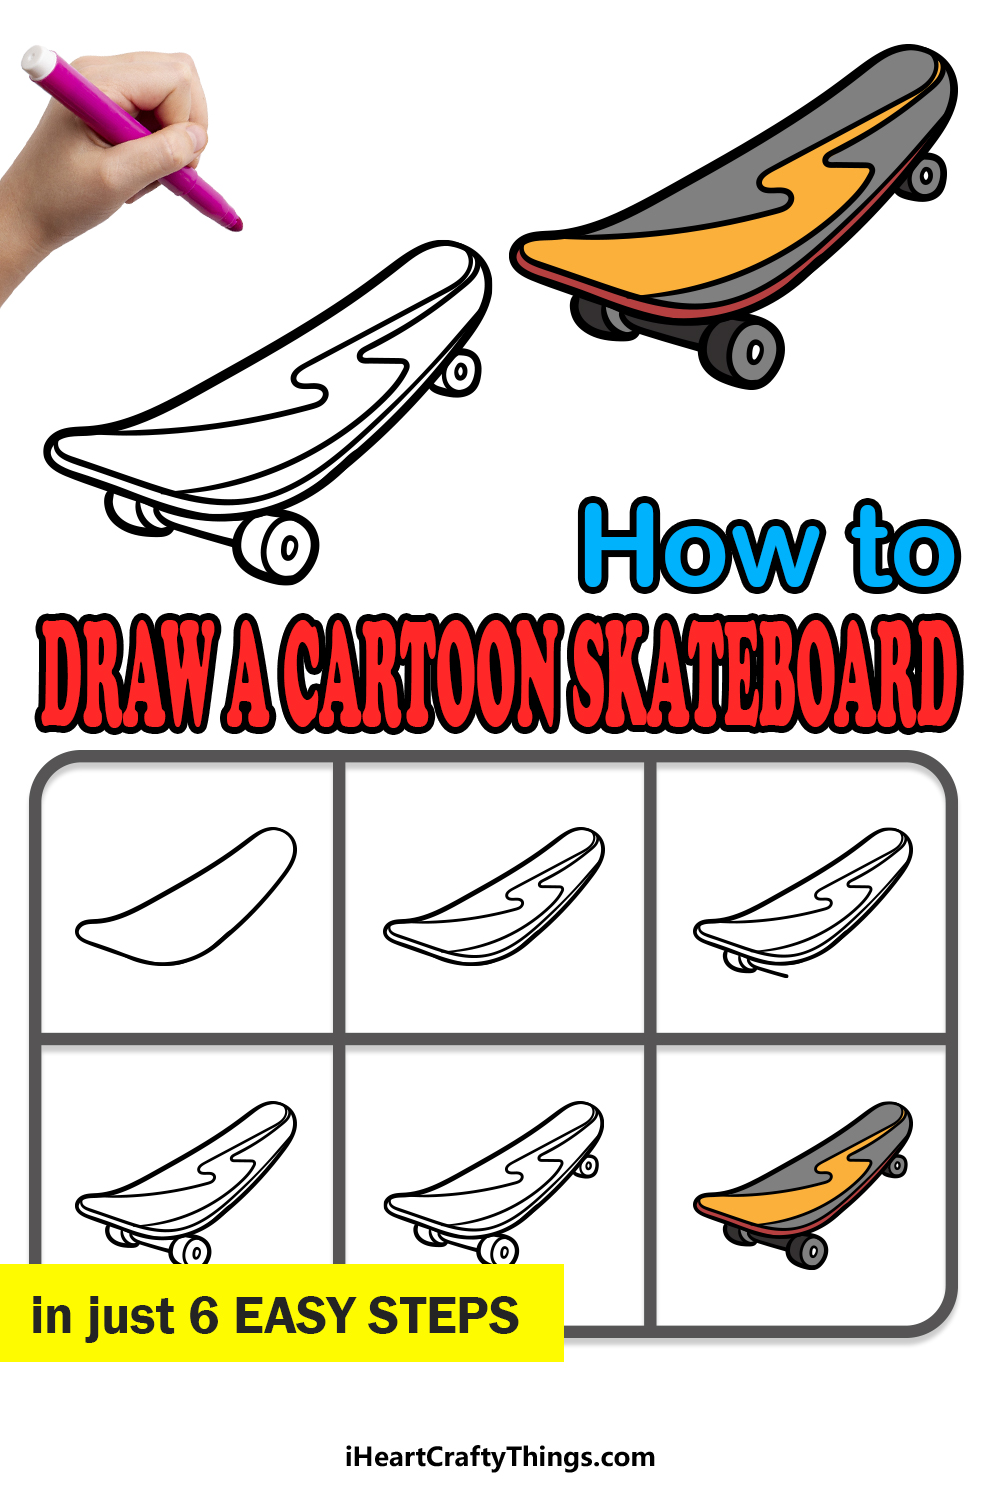 how to draw a cartoon skateboard in 6 easy steps